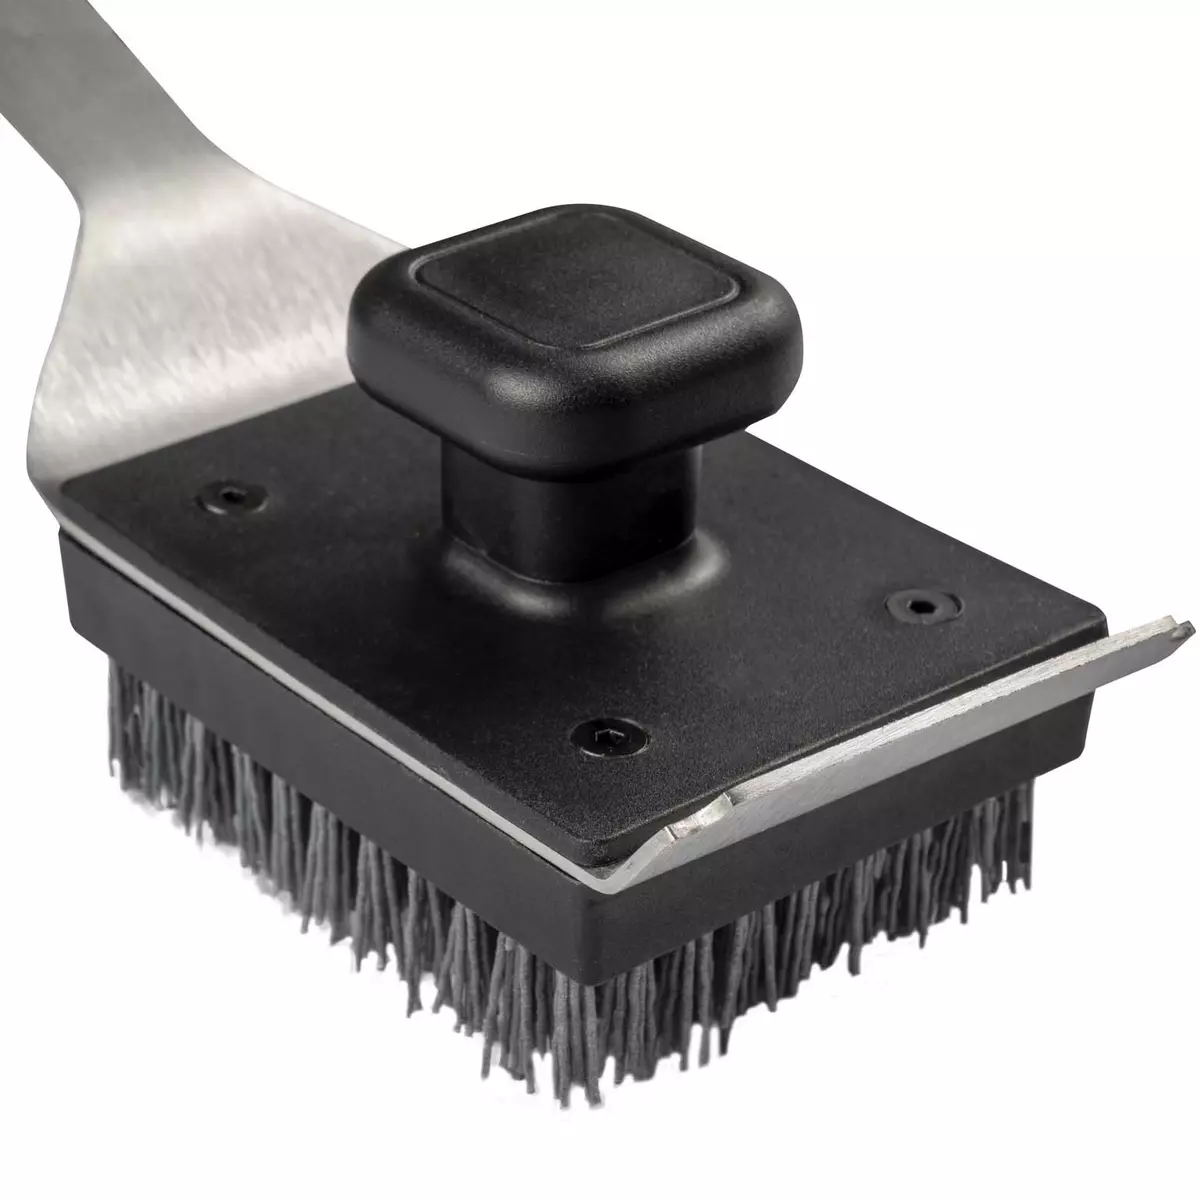 Traeger BBQ Cleaning Brush - image 3